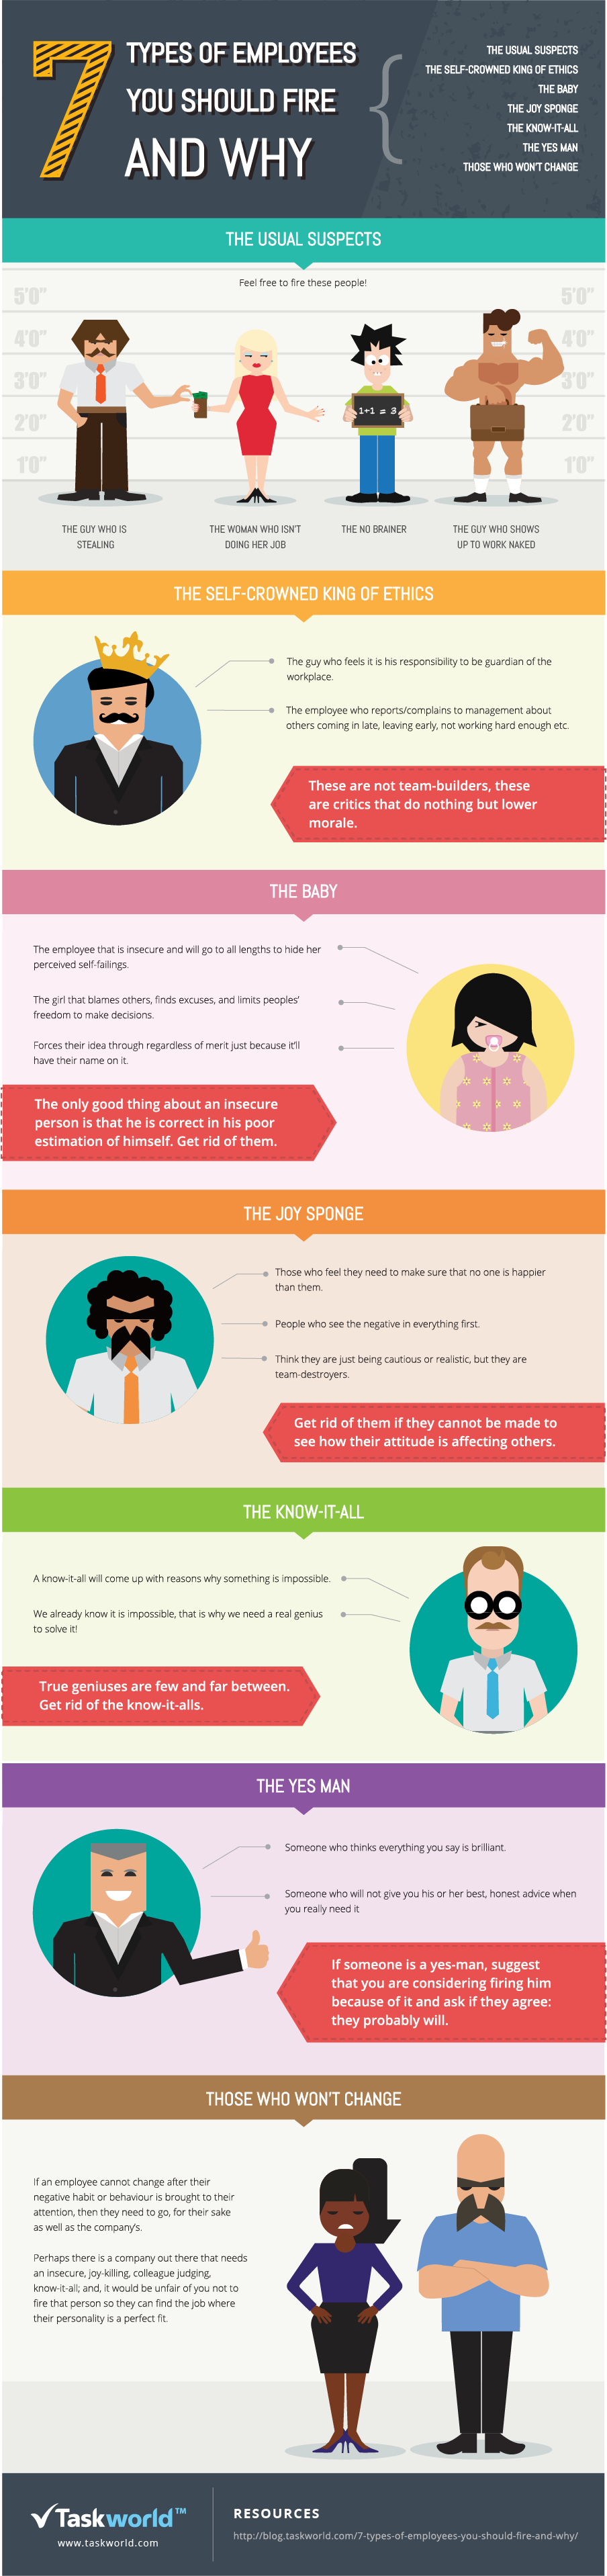 7-types-of-employees-you-should-fire_infographic